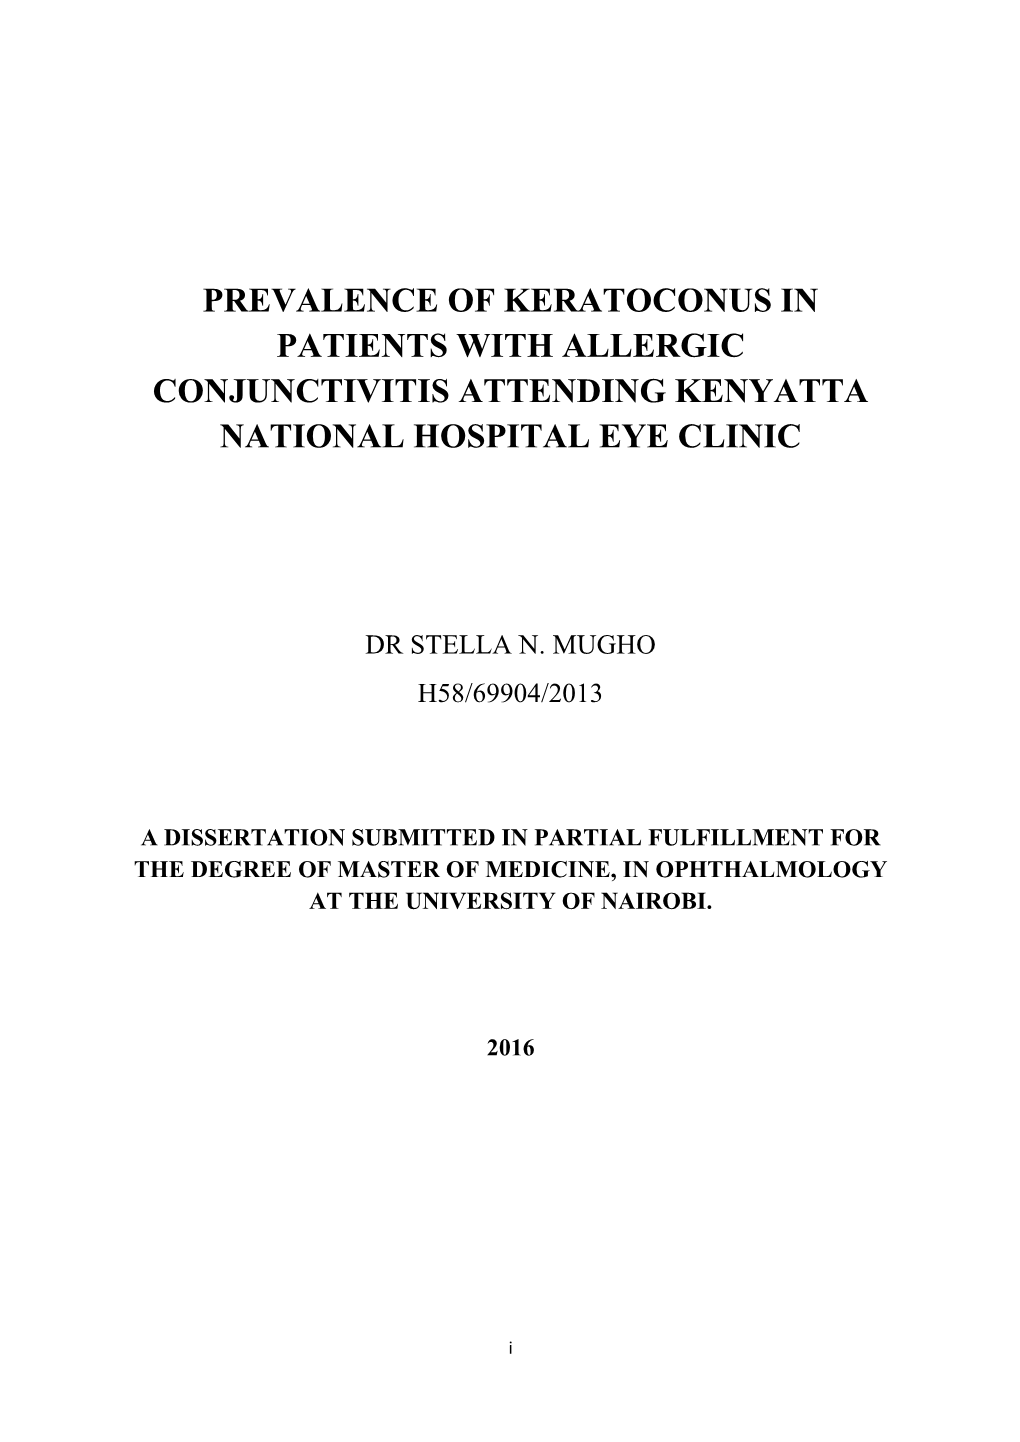 Prevalence of Keratoconus in Patients with Allergic Conjunctivitis Attending Kenyatta National Hospital Eye Clinic